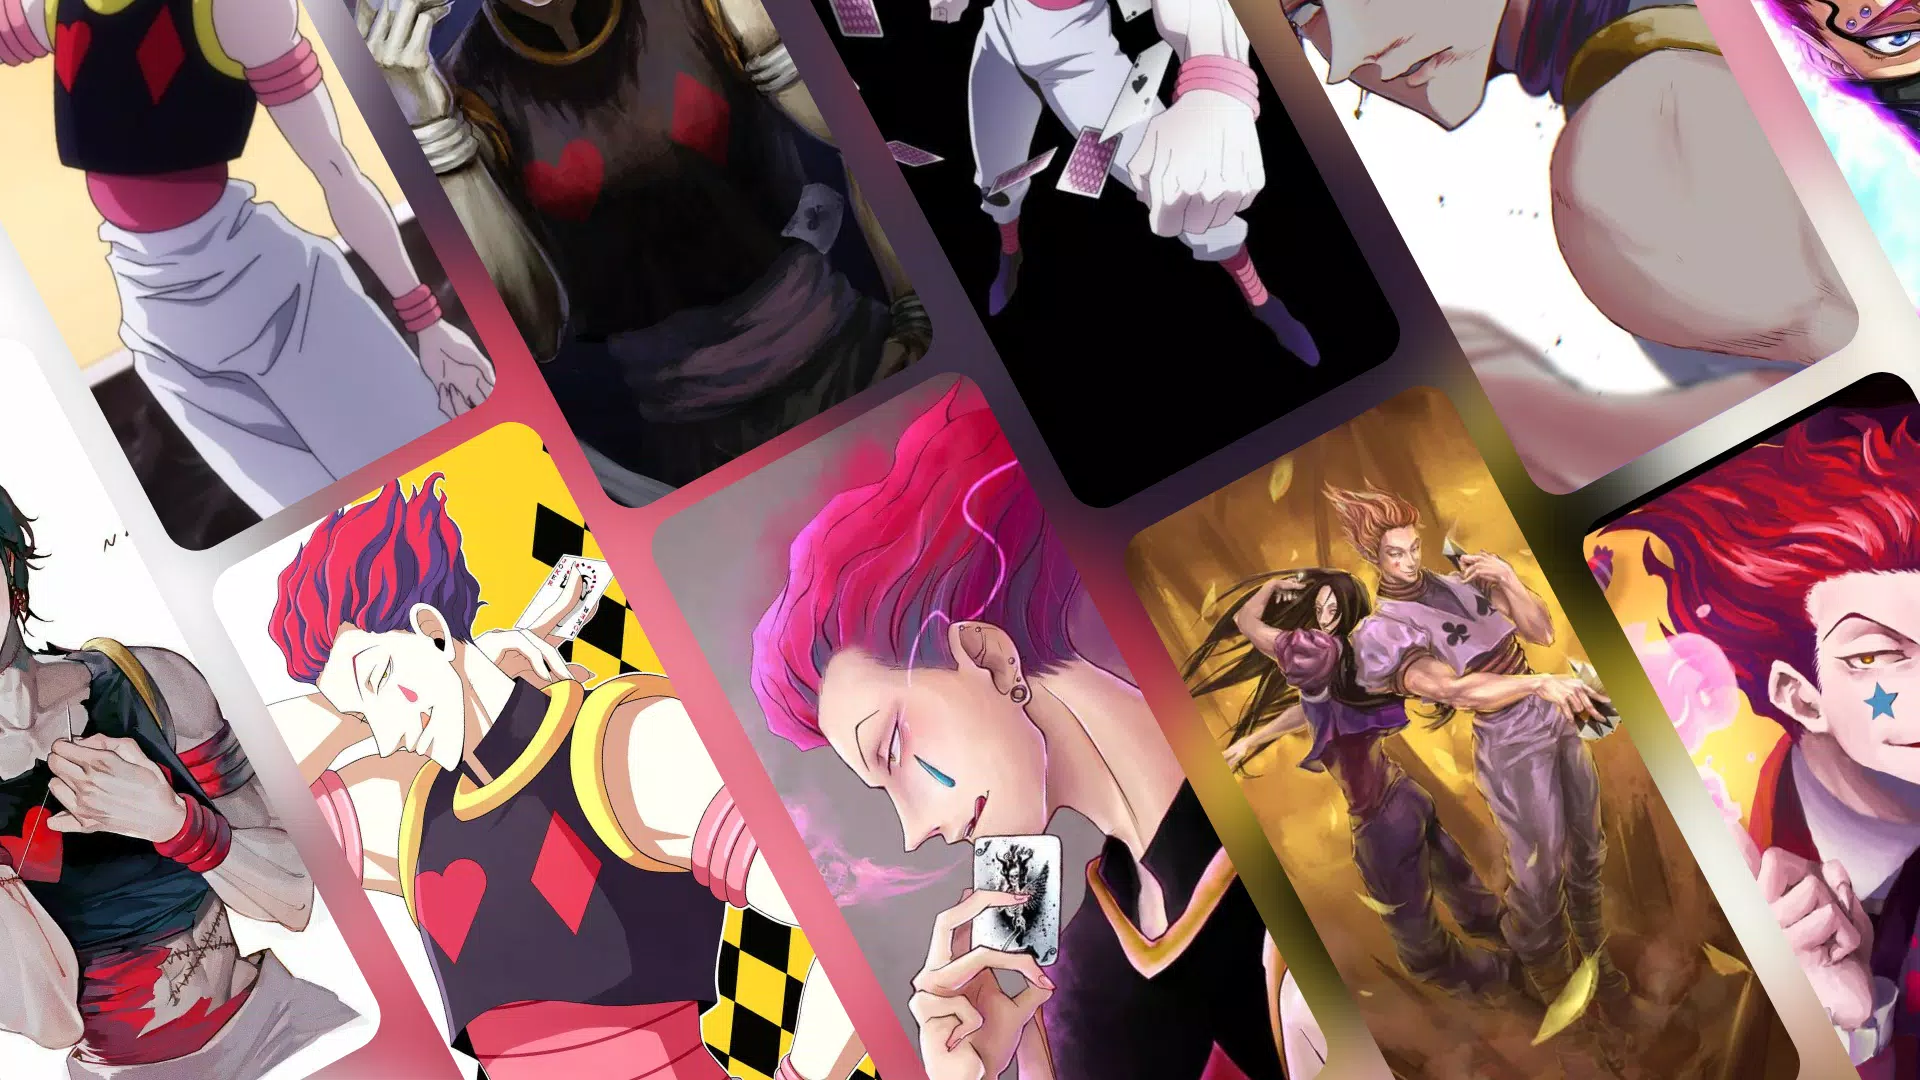 Download the best HD hisoka wallpaper fro android & iphone - HD